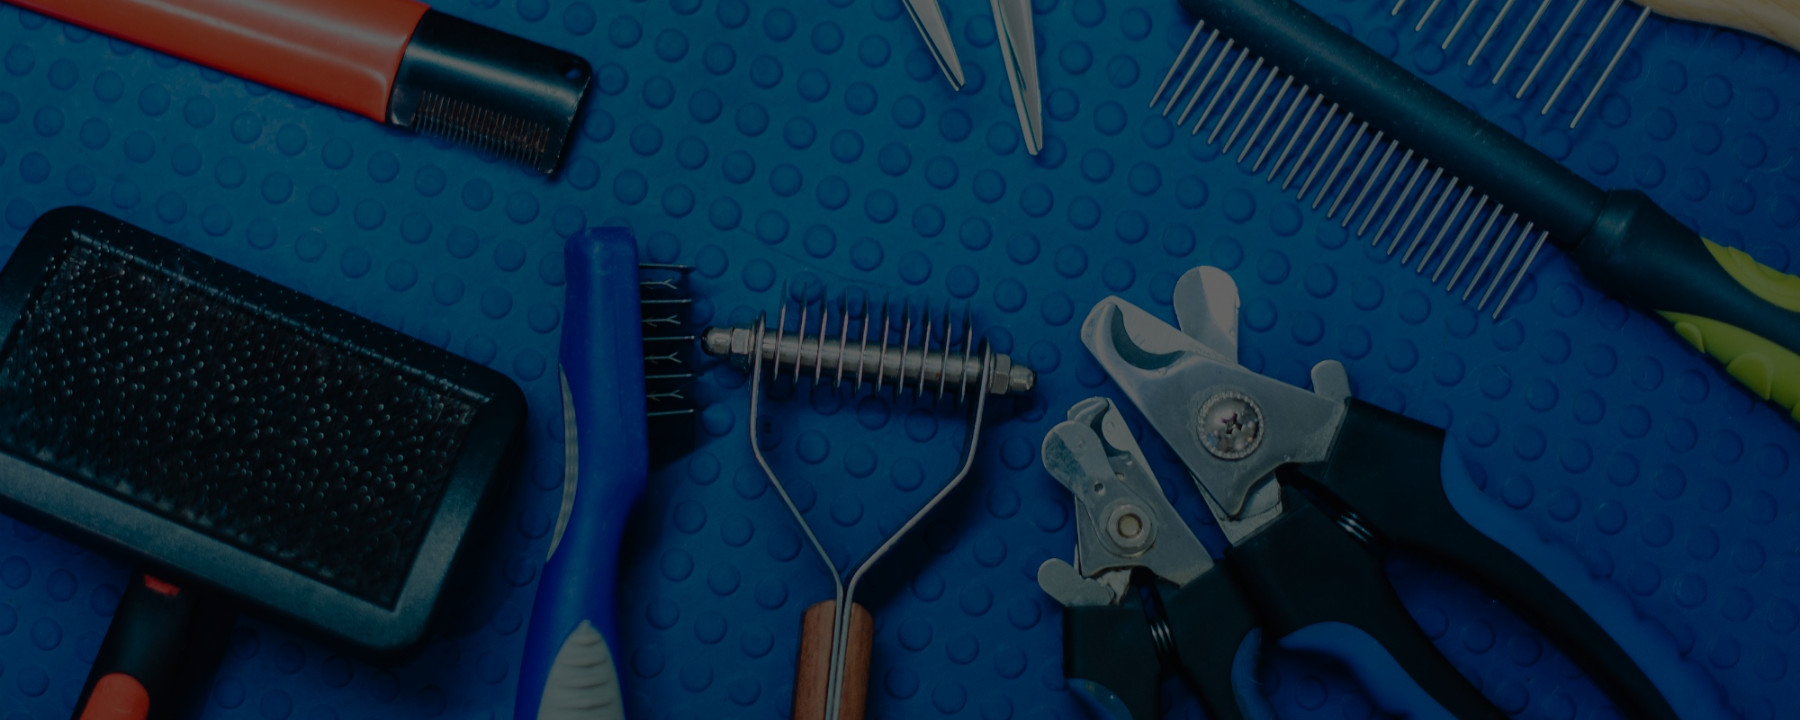 Your Professional Dog Grooming Kit: Brushes, Combs, and Dematting Tools